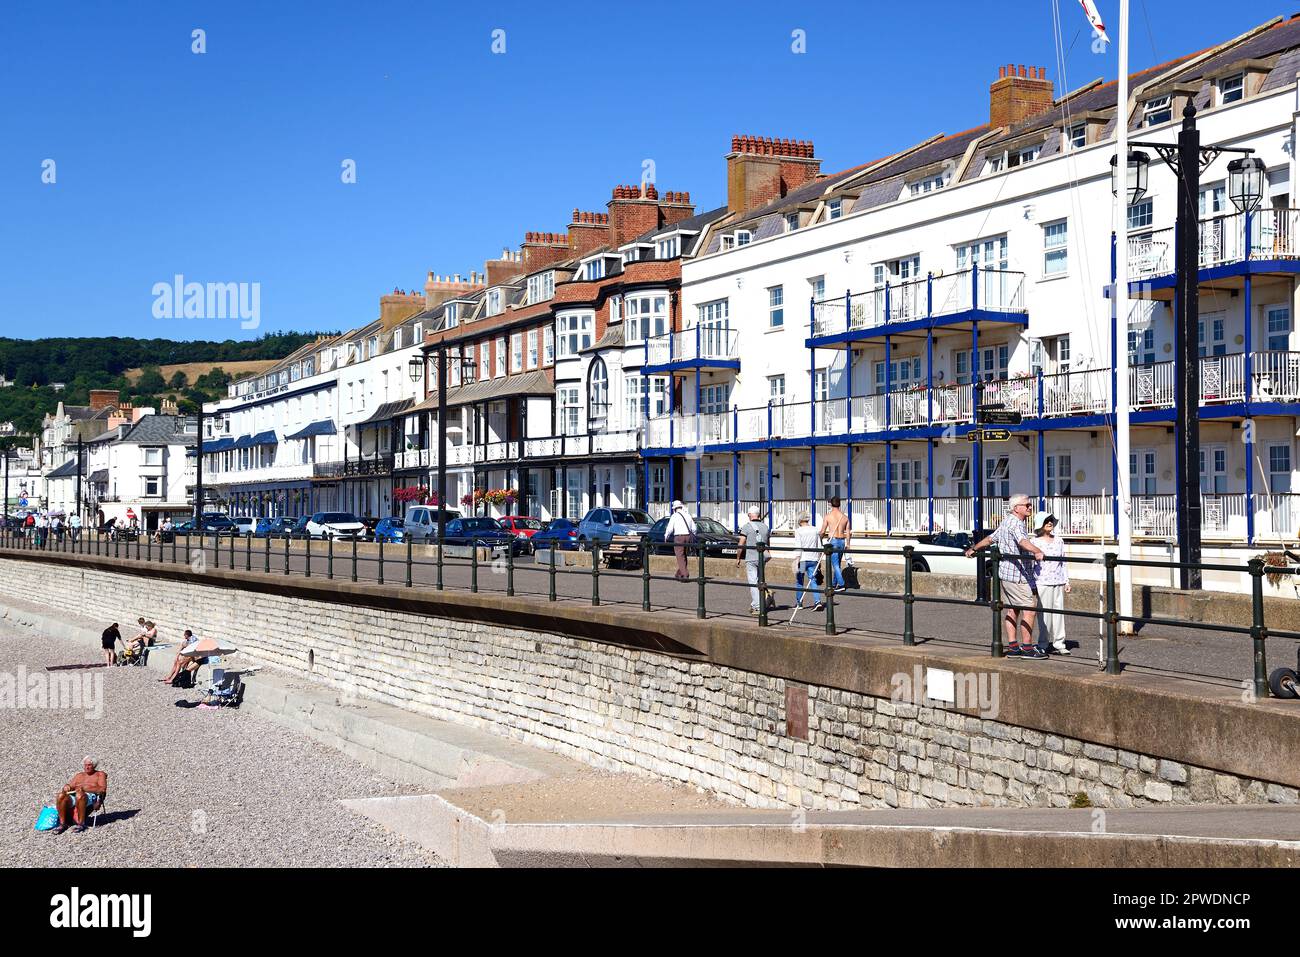 View of hotels along the promenade seen from the beach with tourists enjoying the setting, Sidmouth, Devon, UK. Stock Photo